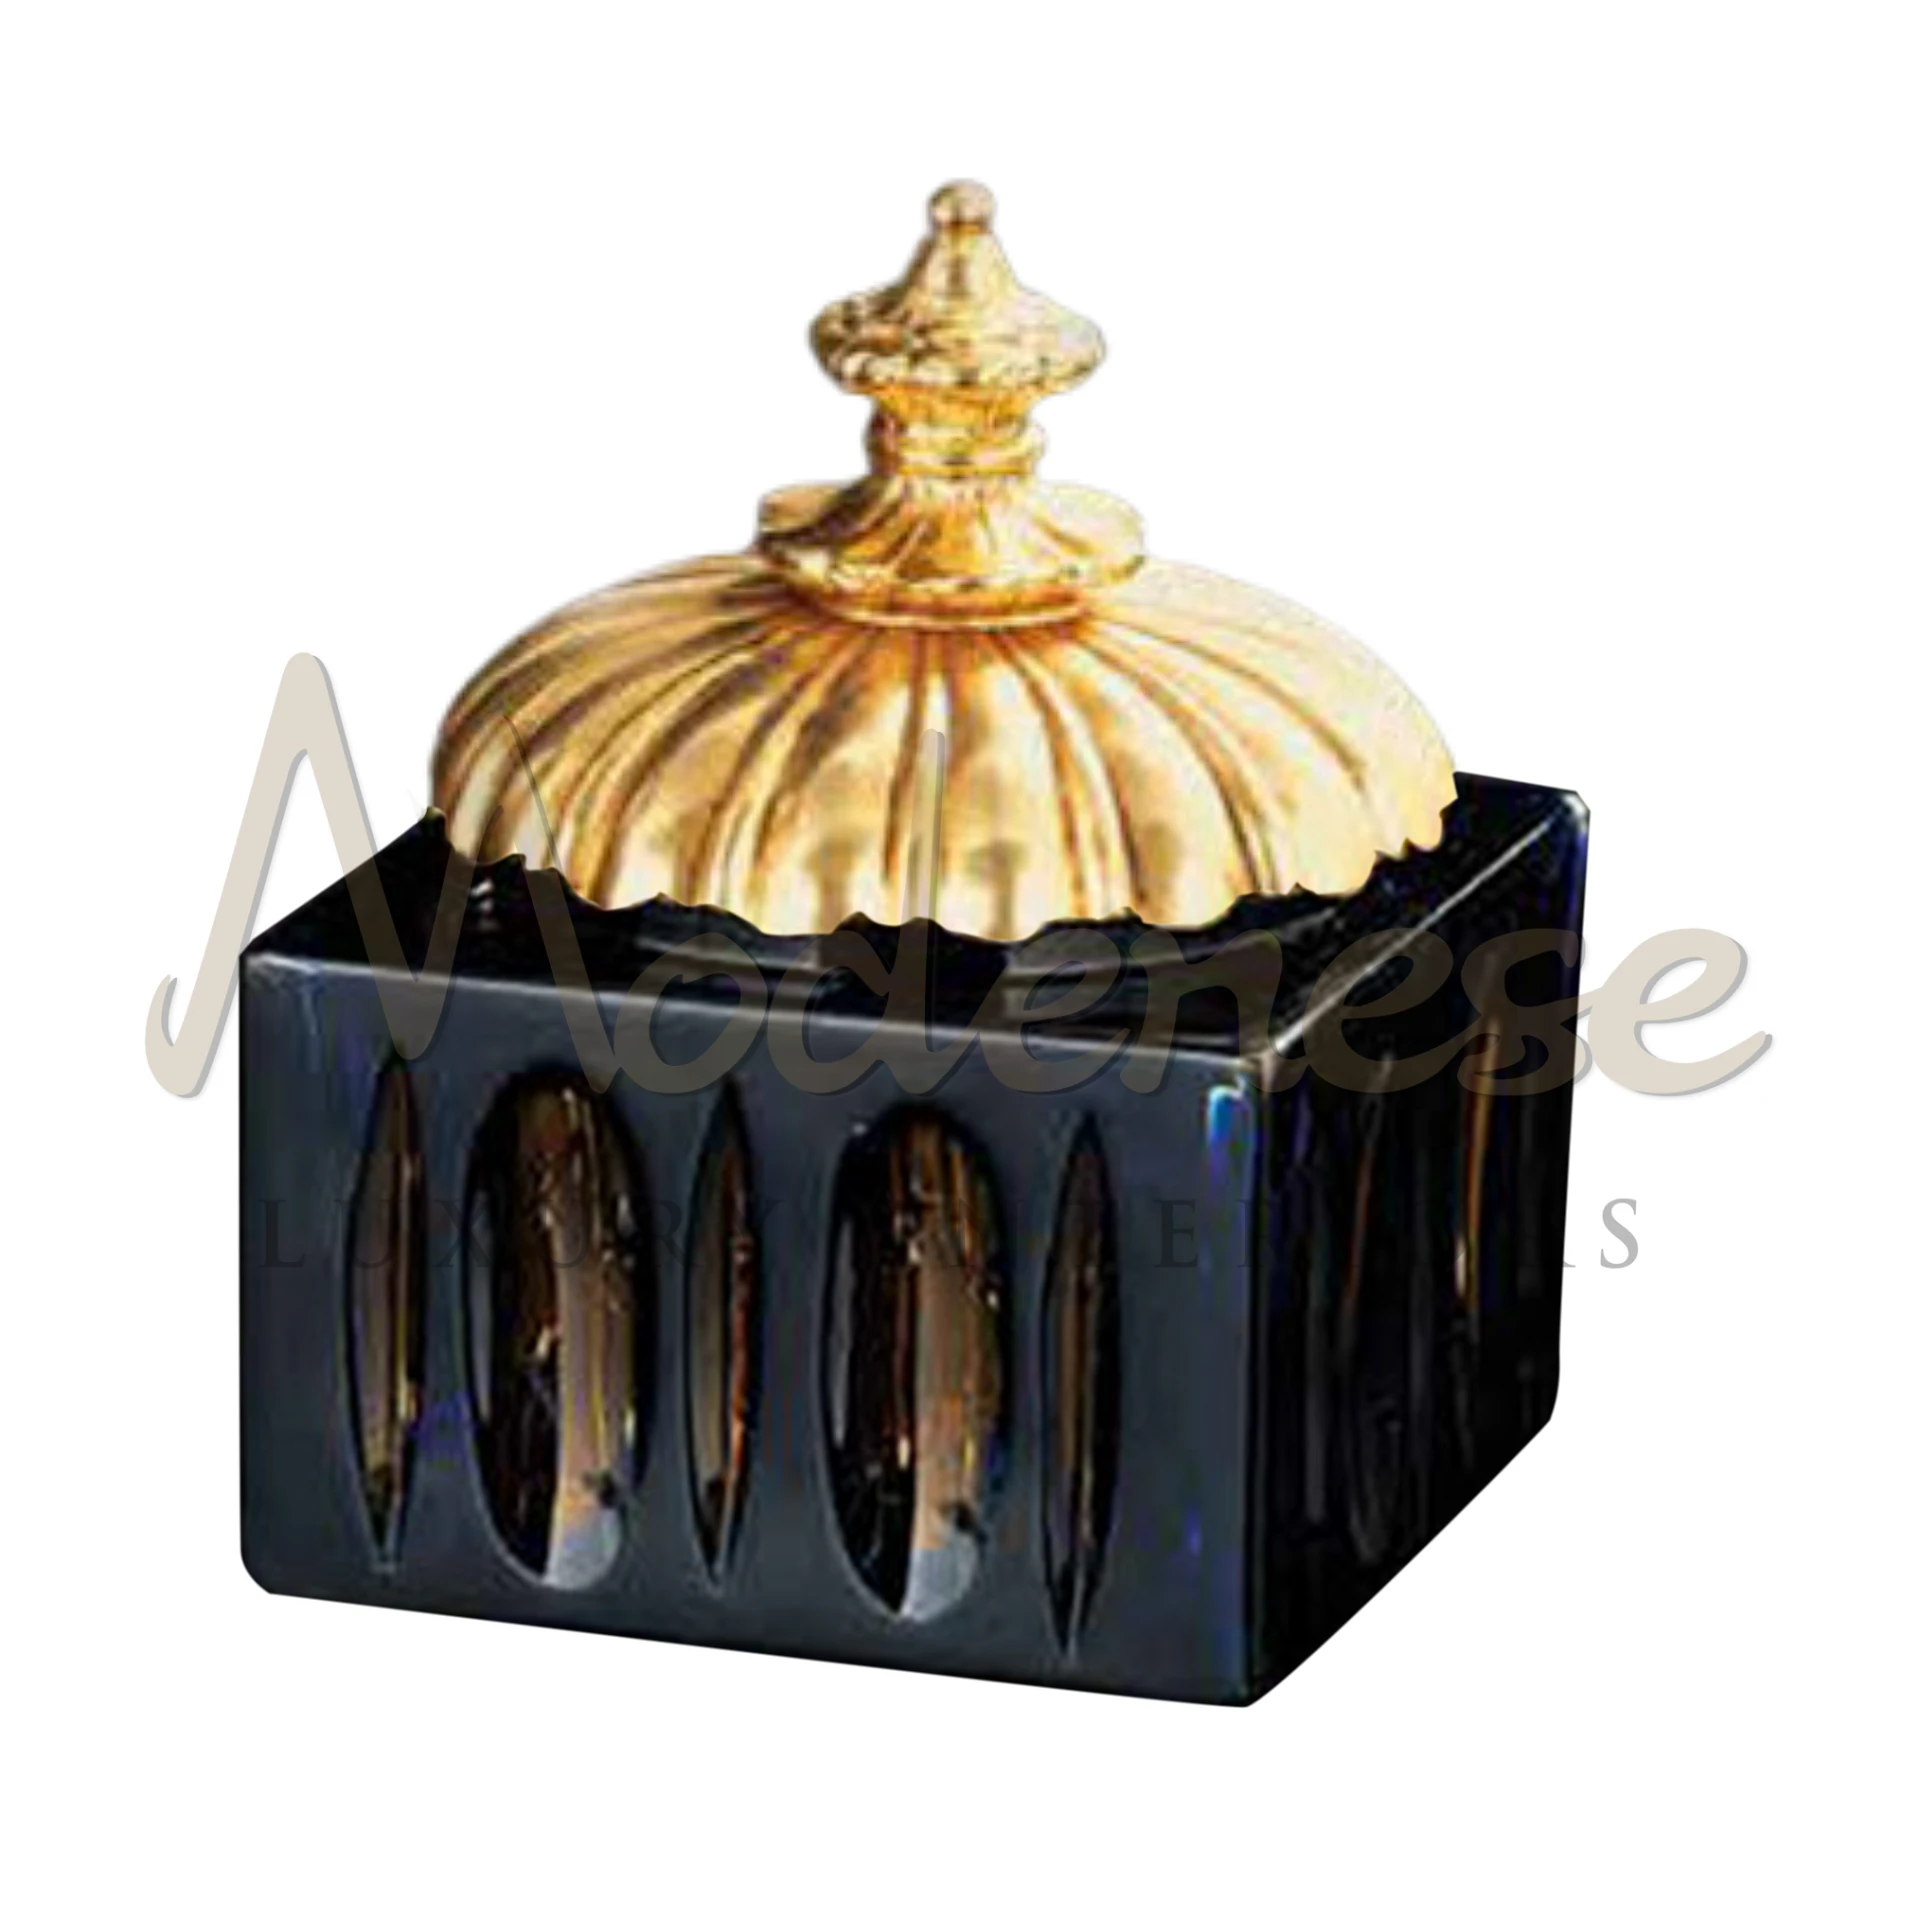 Royal Dark Glass Box by Modenese, high-quality and sophisticated, perfect for adding luxurious elegance to any interior design.